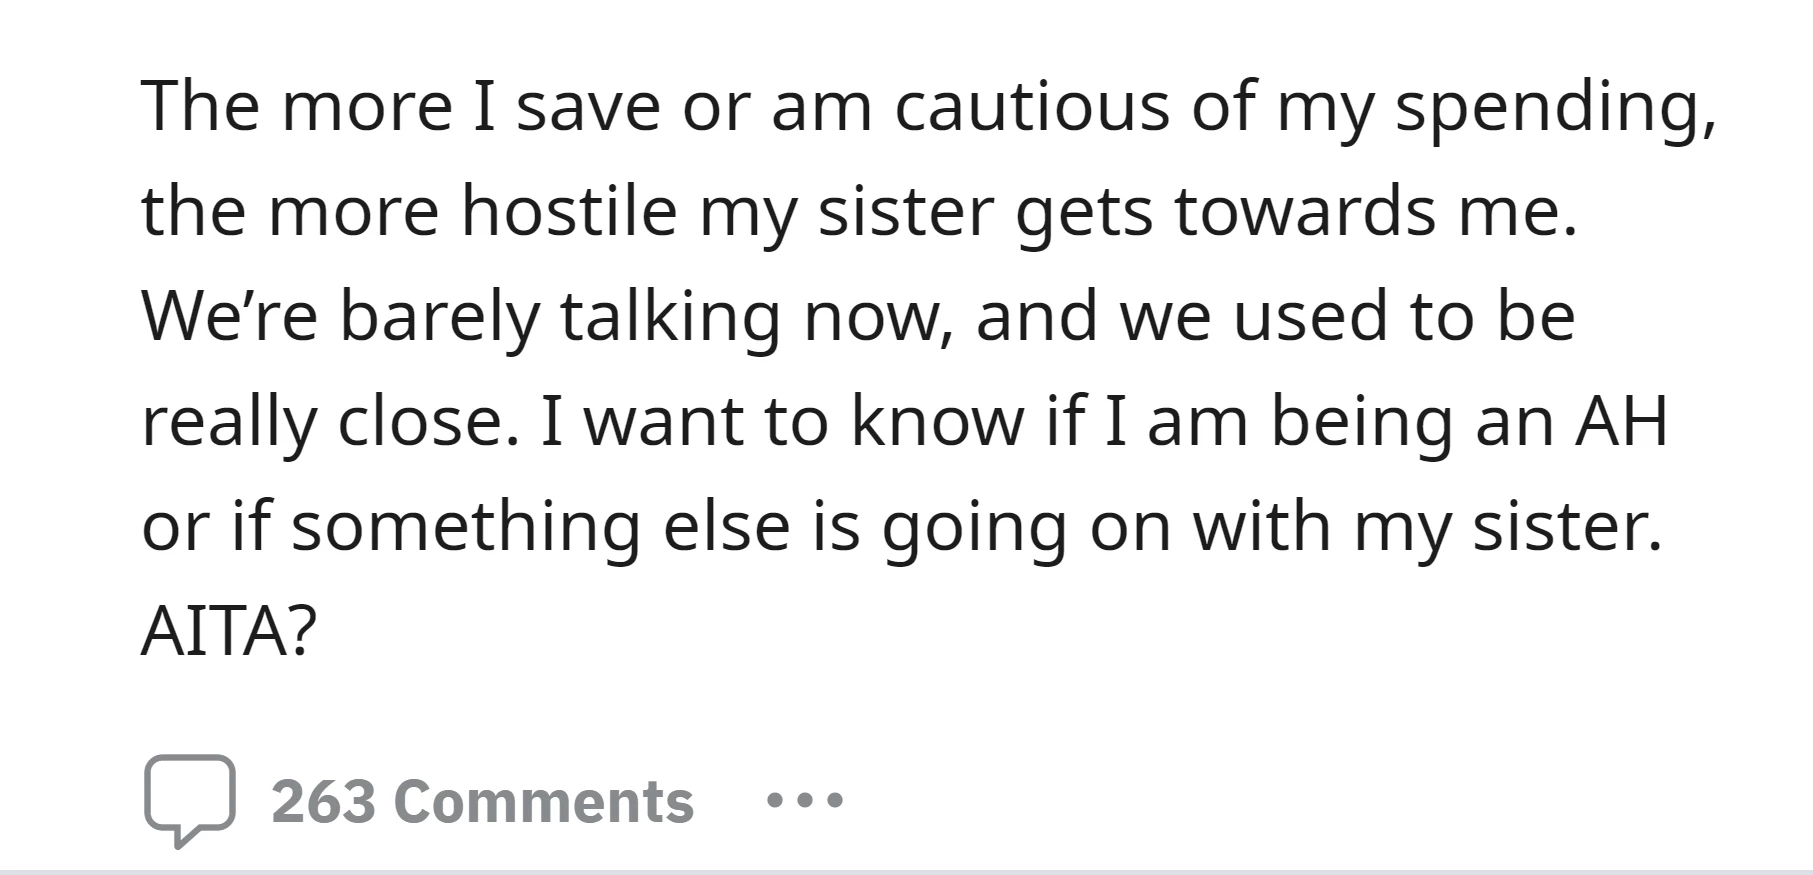 The OP is experiencing increased hostility from her sister